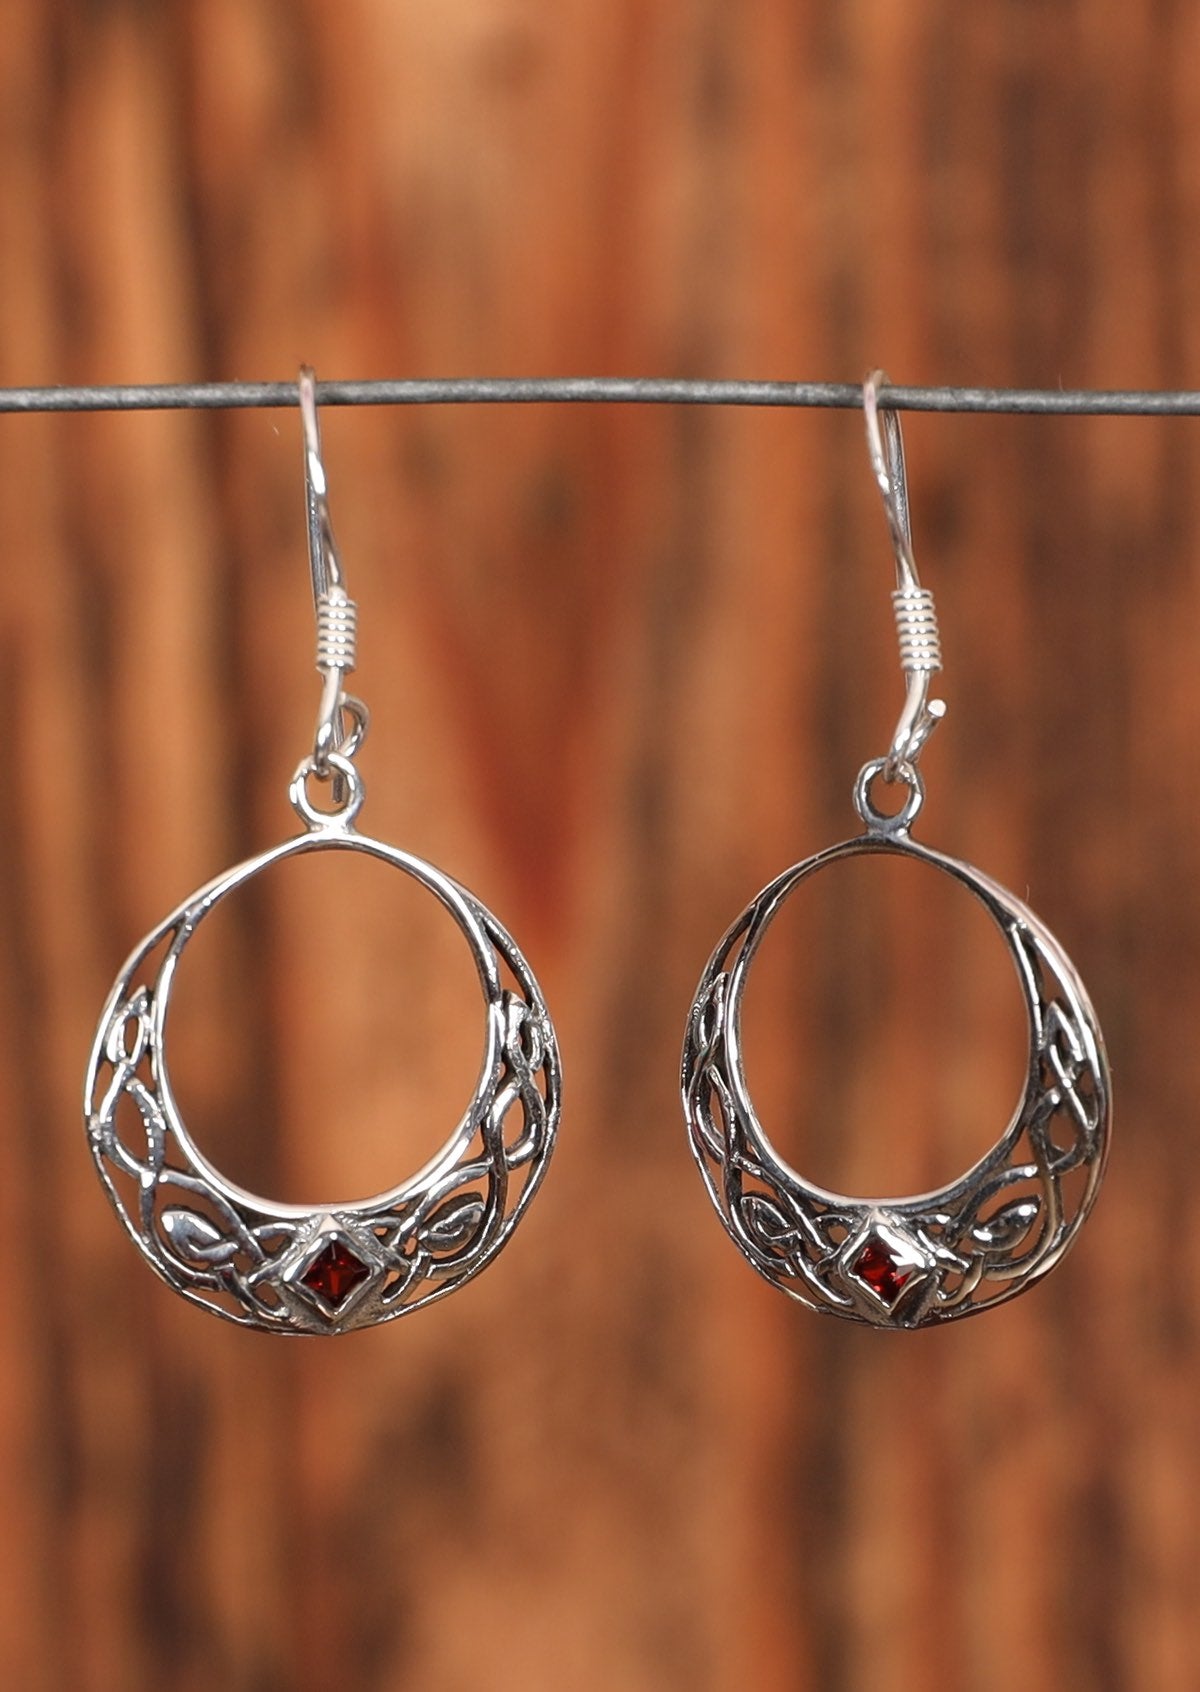 92.5% silver hook earrings in the shape of a woven moon with a red diamond shaped gem set at the base. Hanging on a wire for display.